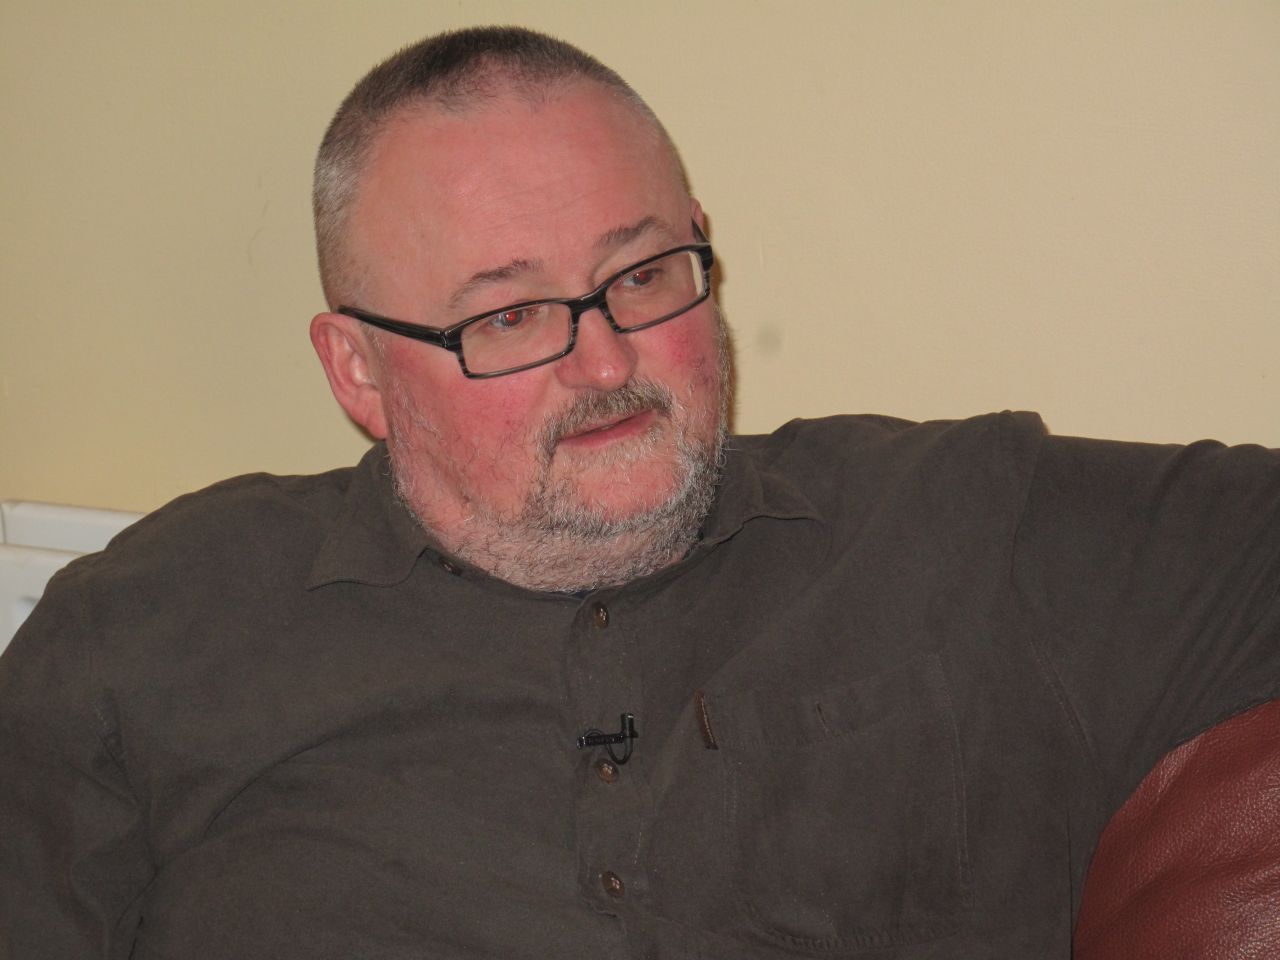 Anthony McIntyre is the researcher and former IRA  member who persauded his old comrades to speak on tape. He believes his life is in danger if the tapes are released.